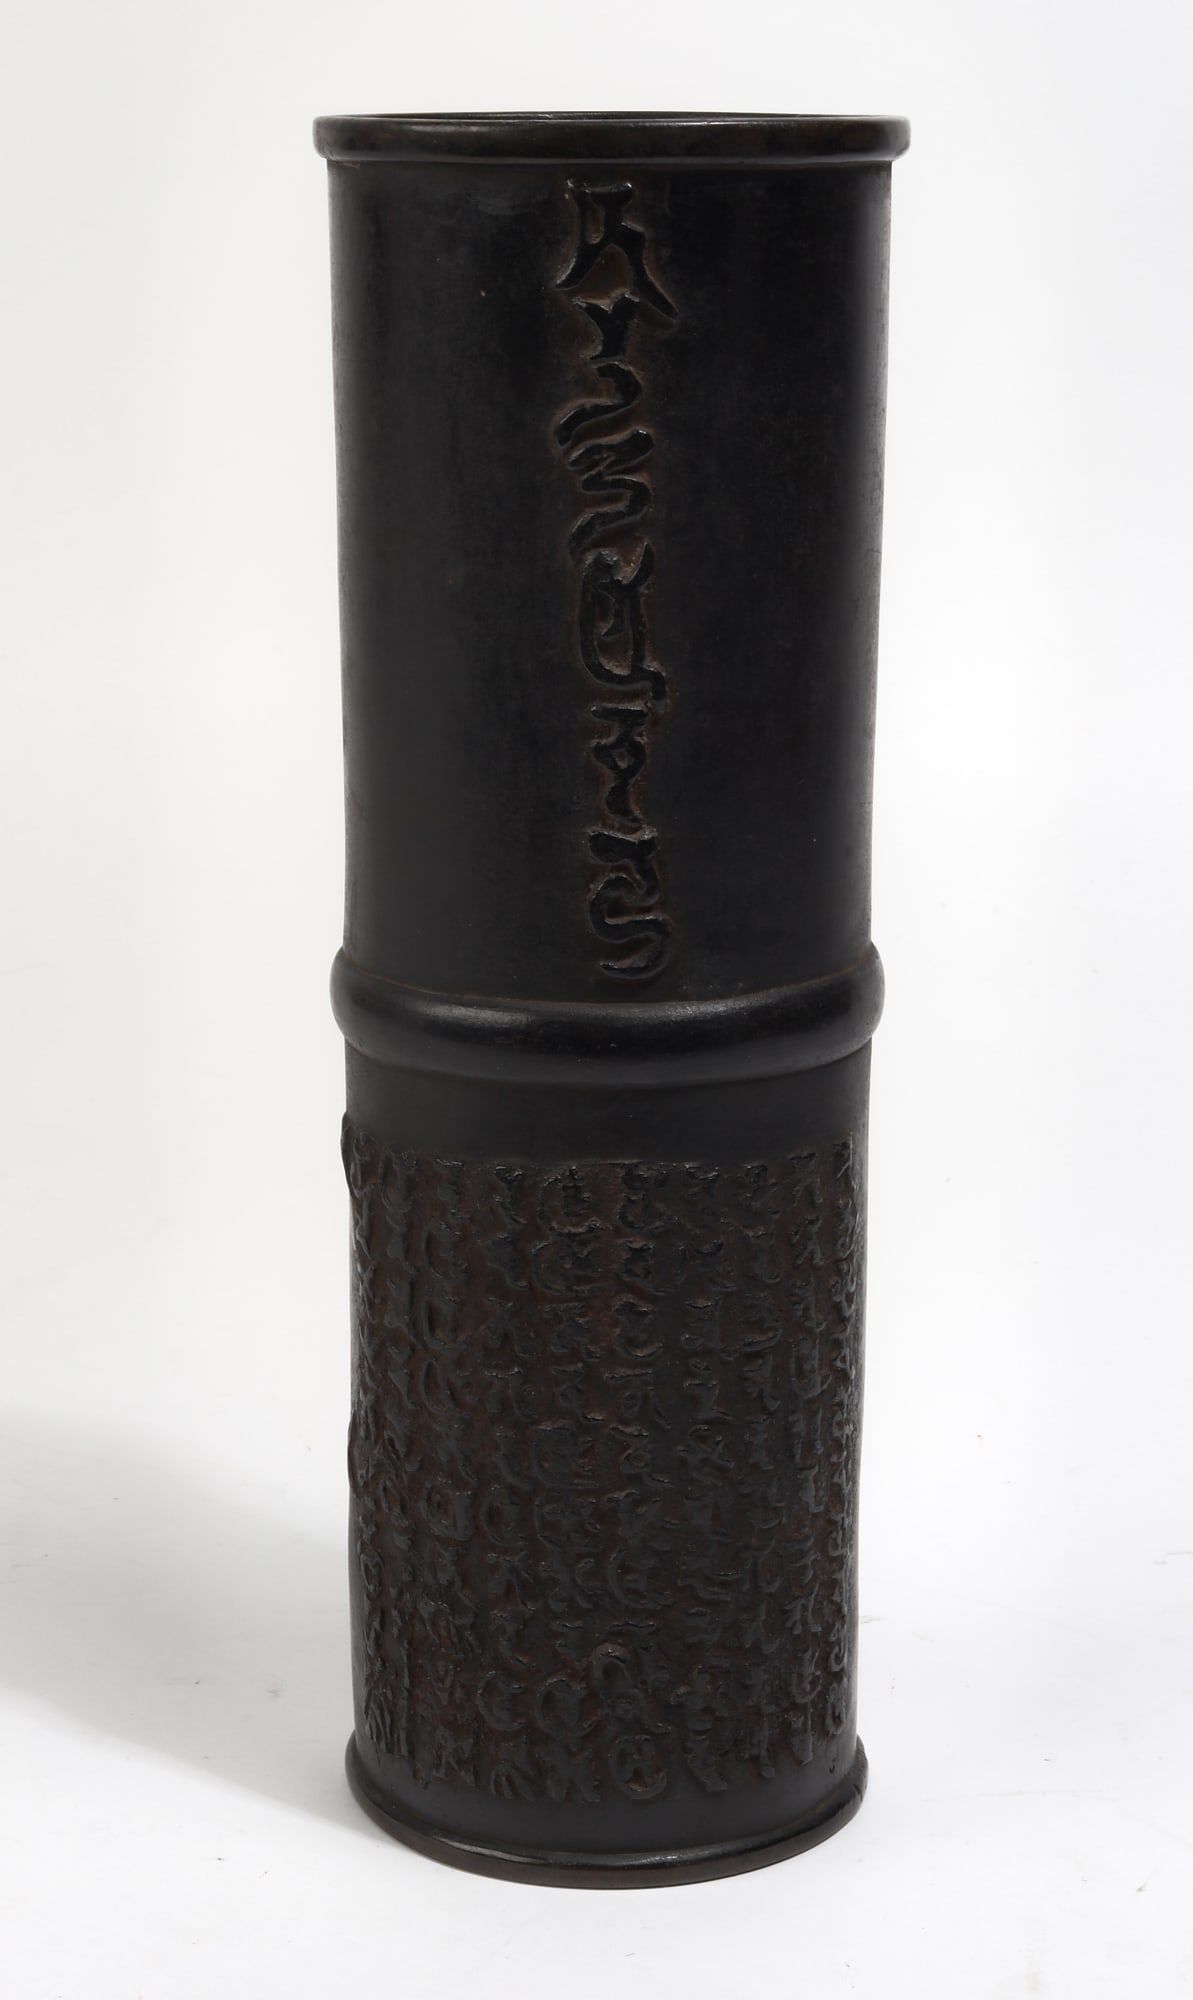 AN ASIAN PATINATED BRONZE CYLINDRICAL 2fb3a75